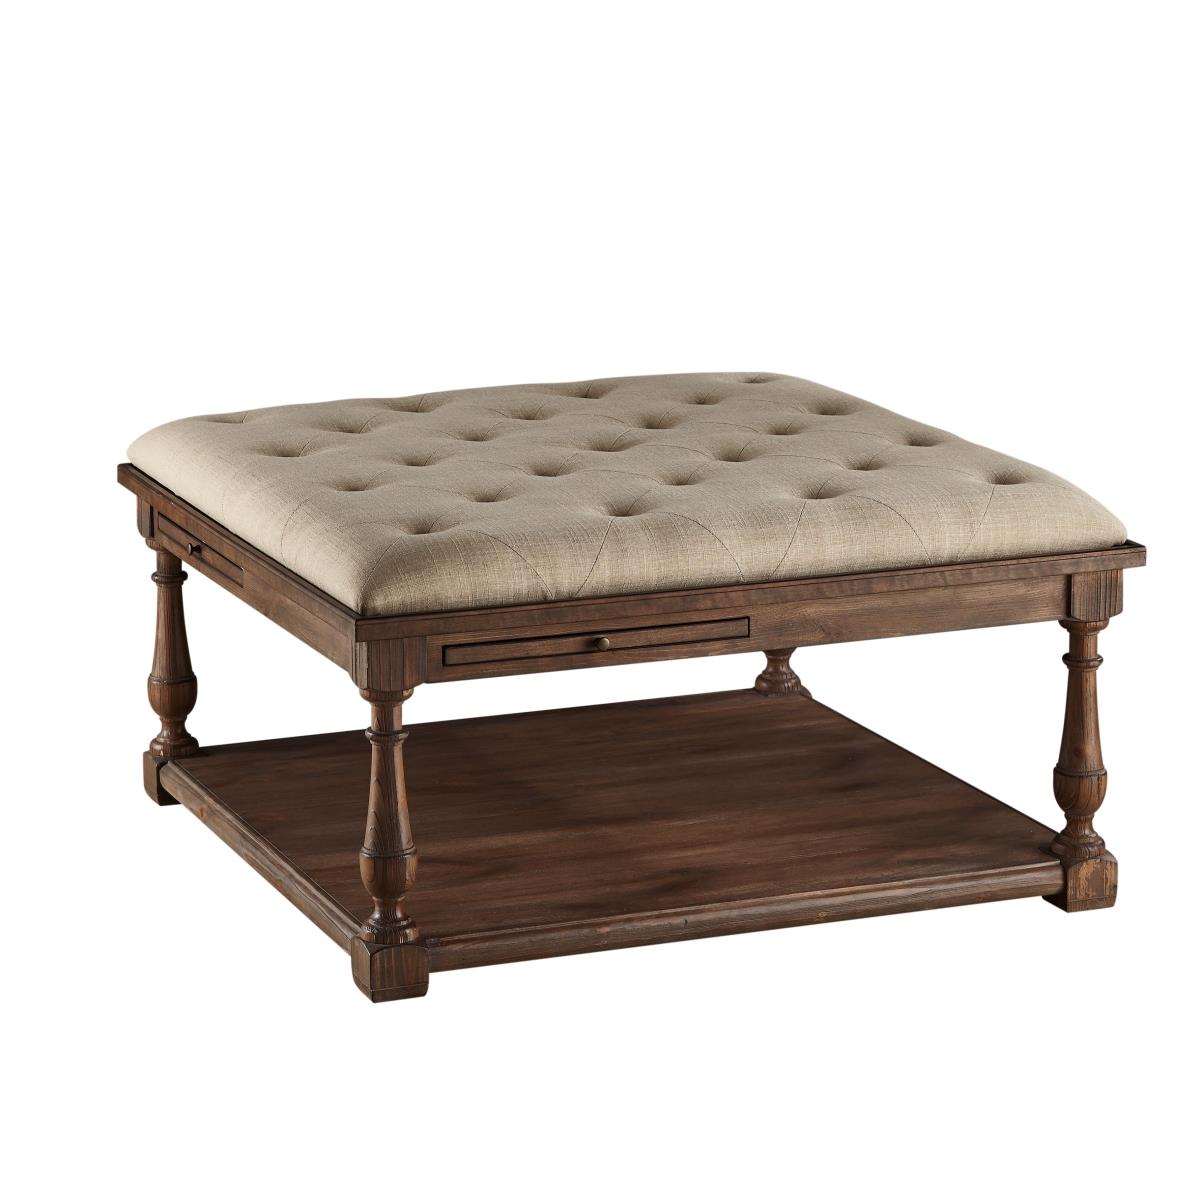 Picture of Bassett 2527-LR-130 Pemberton Ottoman Cocktail Table - 38 x 38 x 19 in.